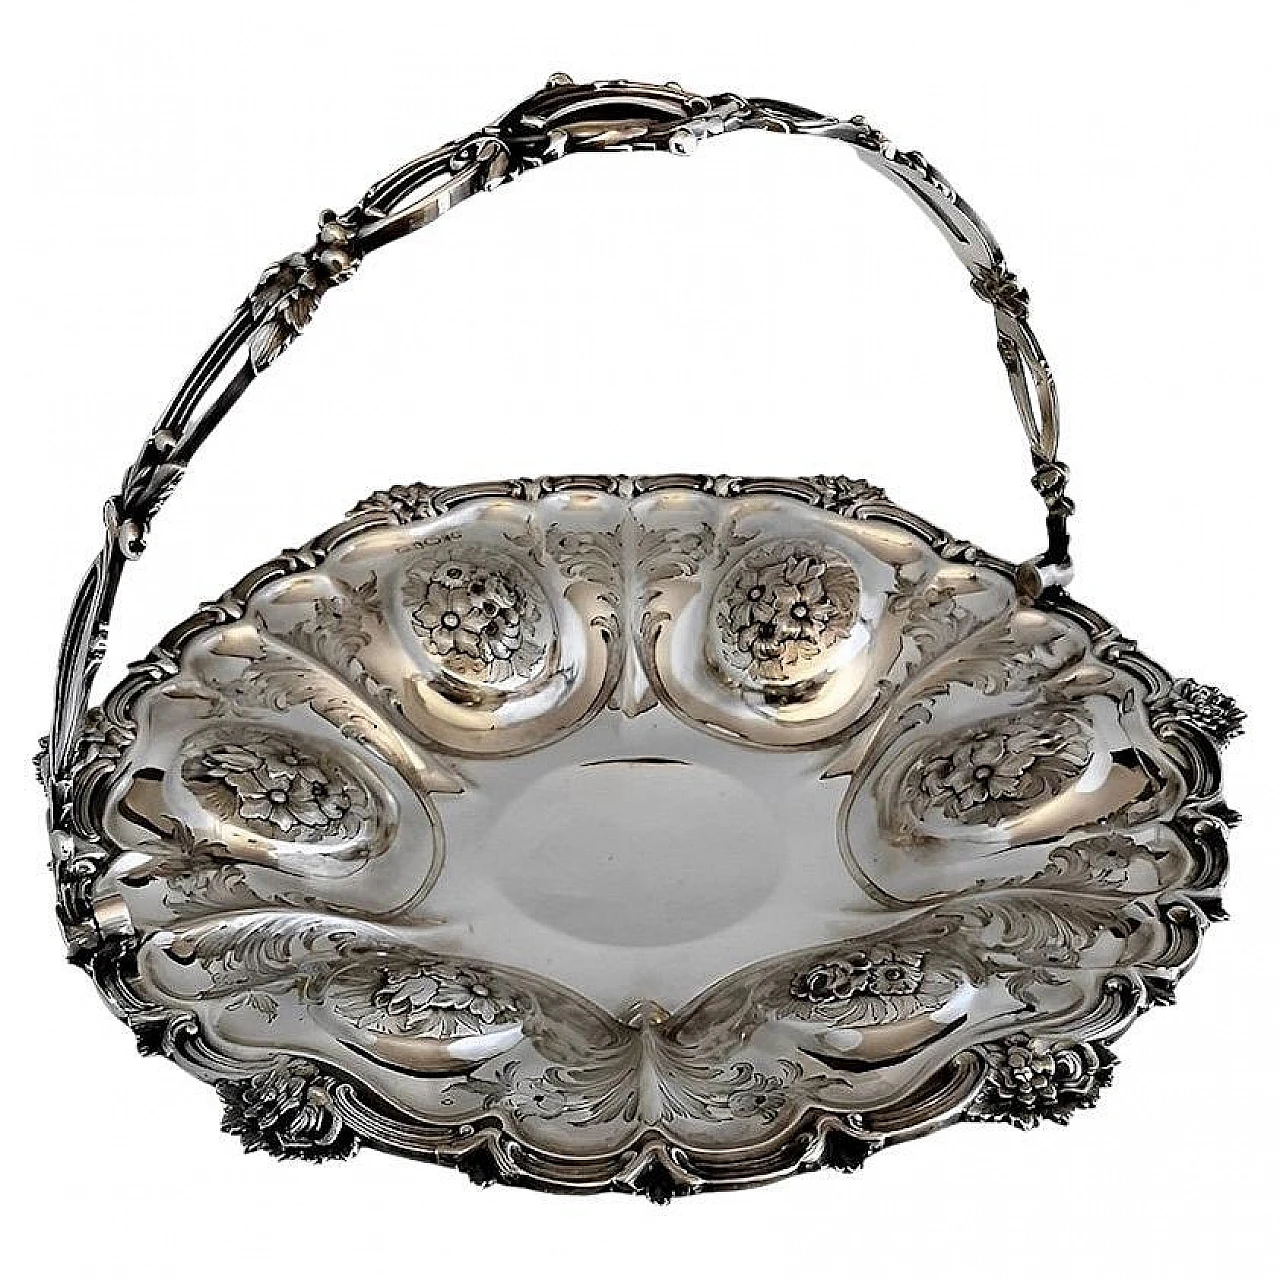 Victorian chiselled and engraved 925 silver basket, late 19th century 1